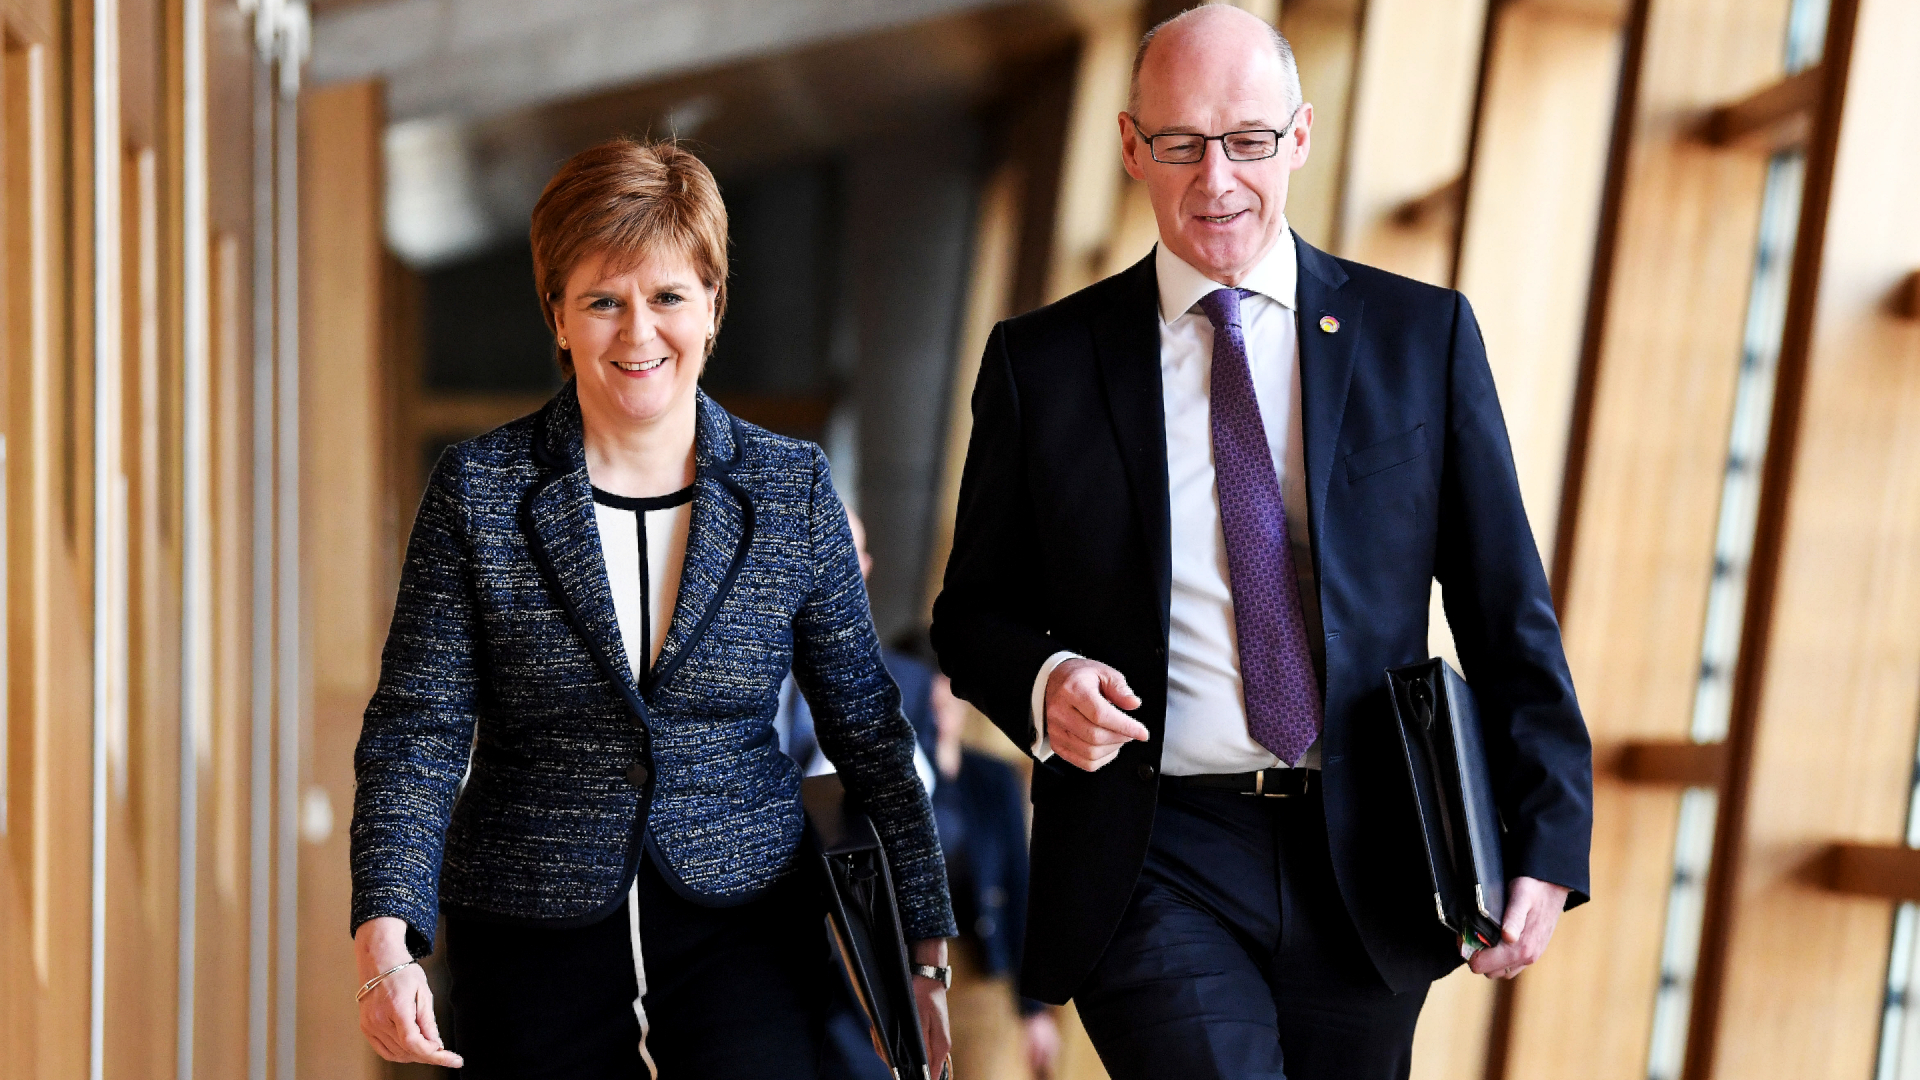 Nicola Sturgeon described John Swinney as one of the most important people in her life.